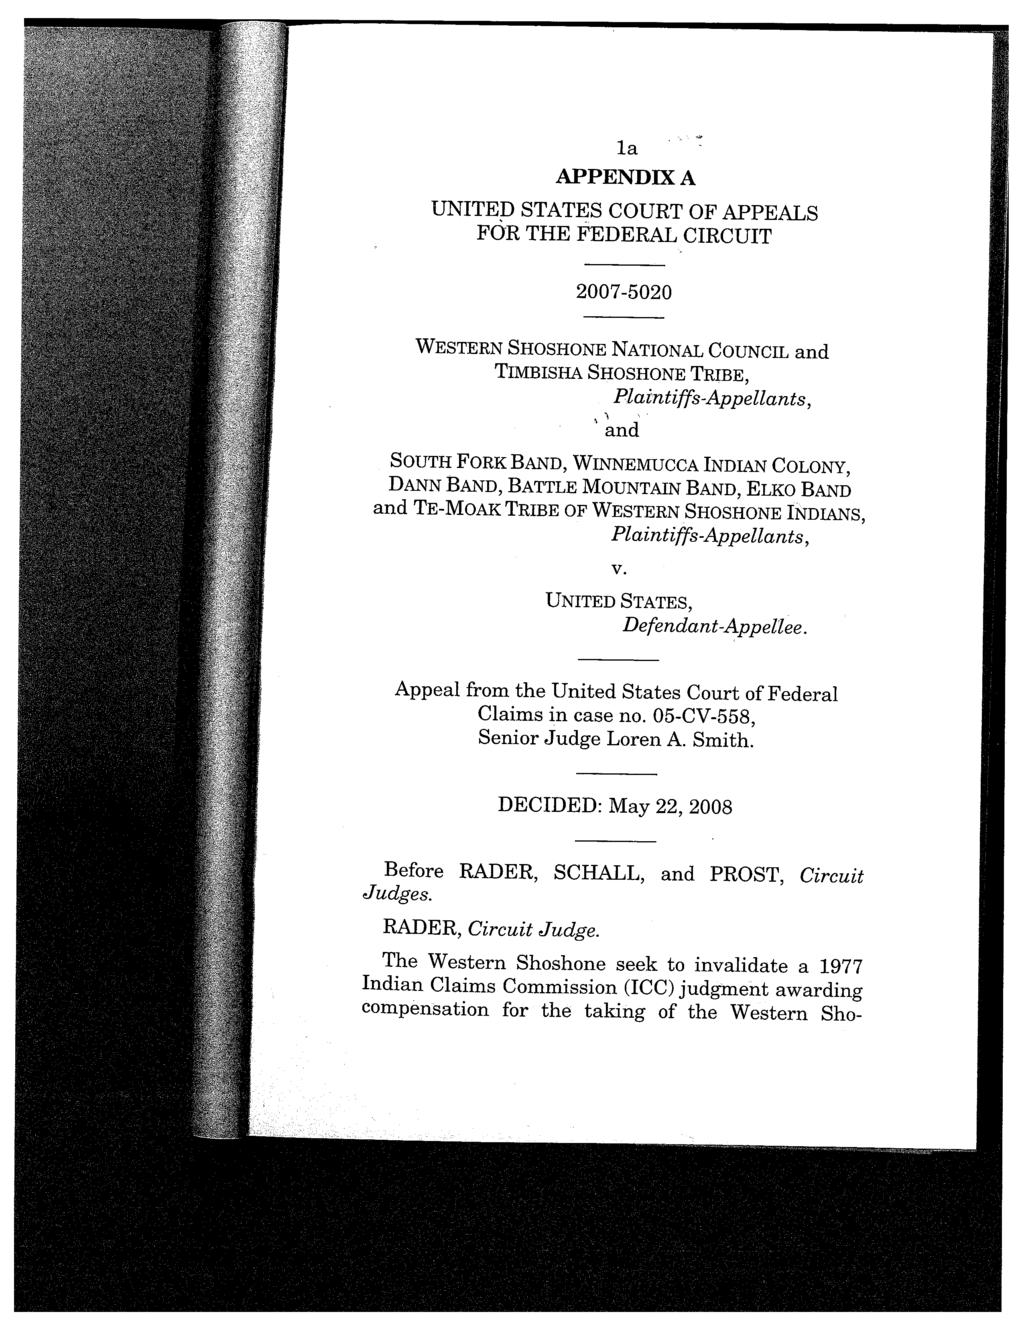 1a APPENDIX A UNITED STATES COURT OF APPEALS,.